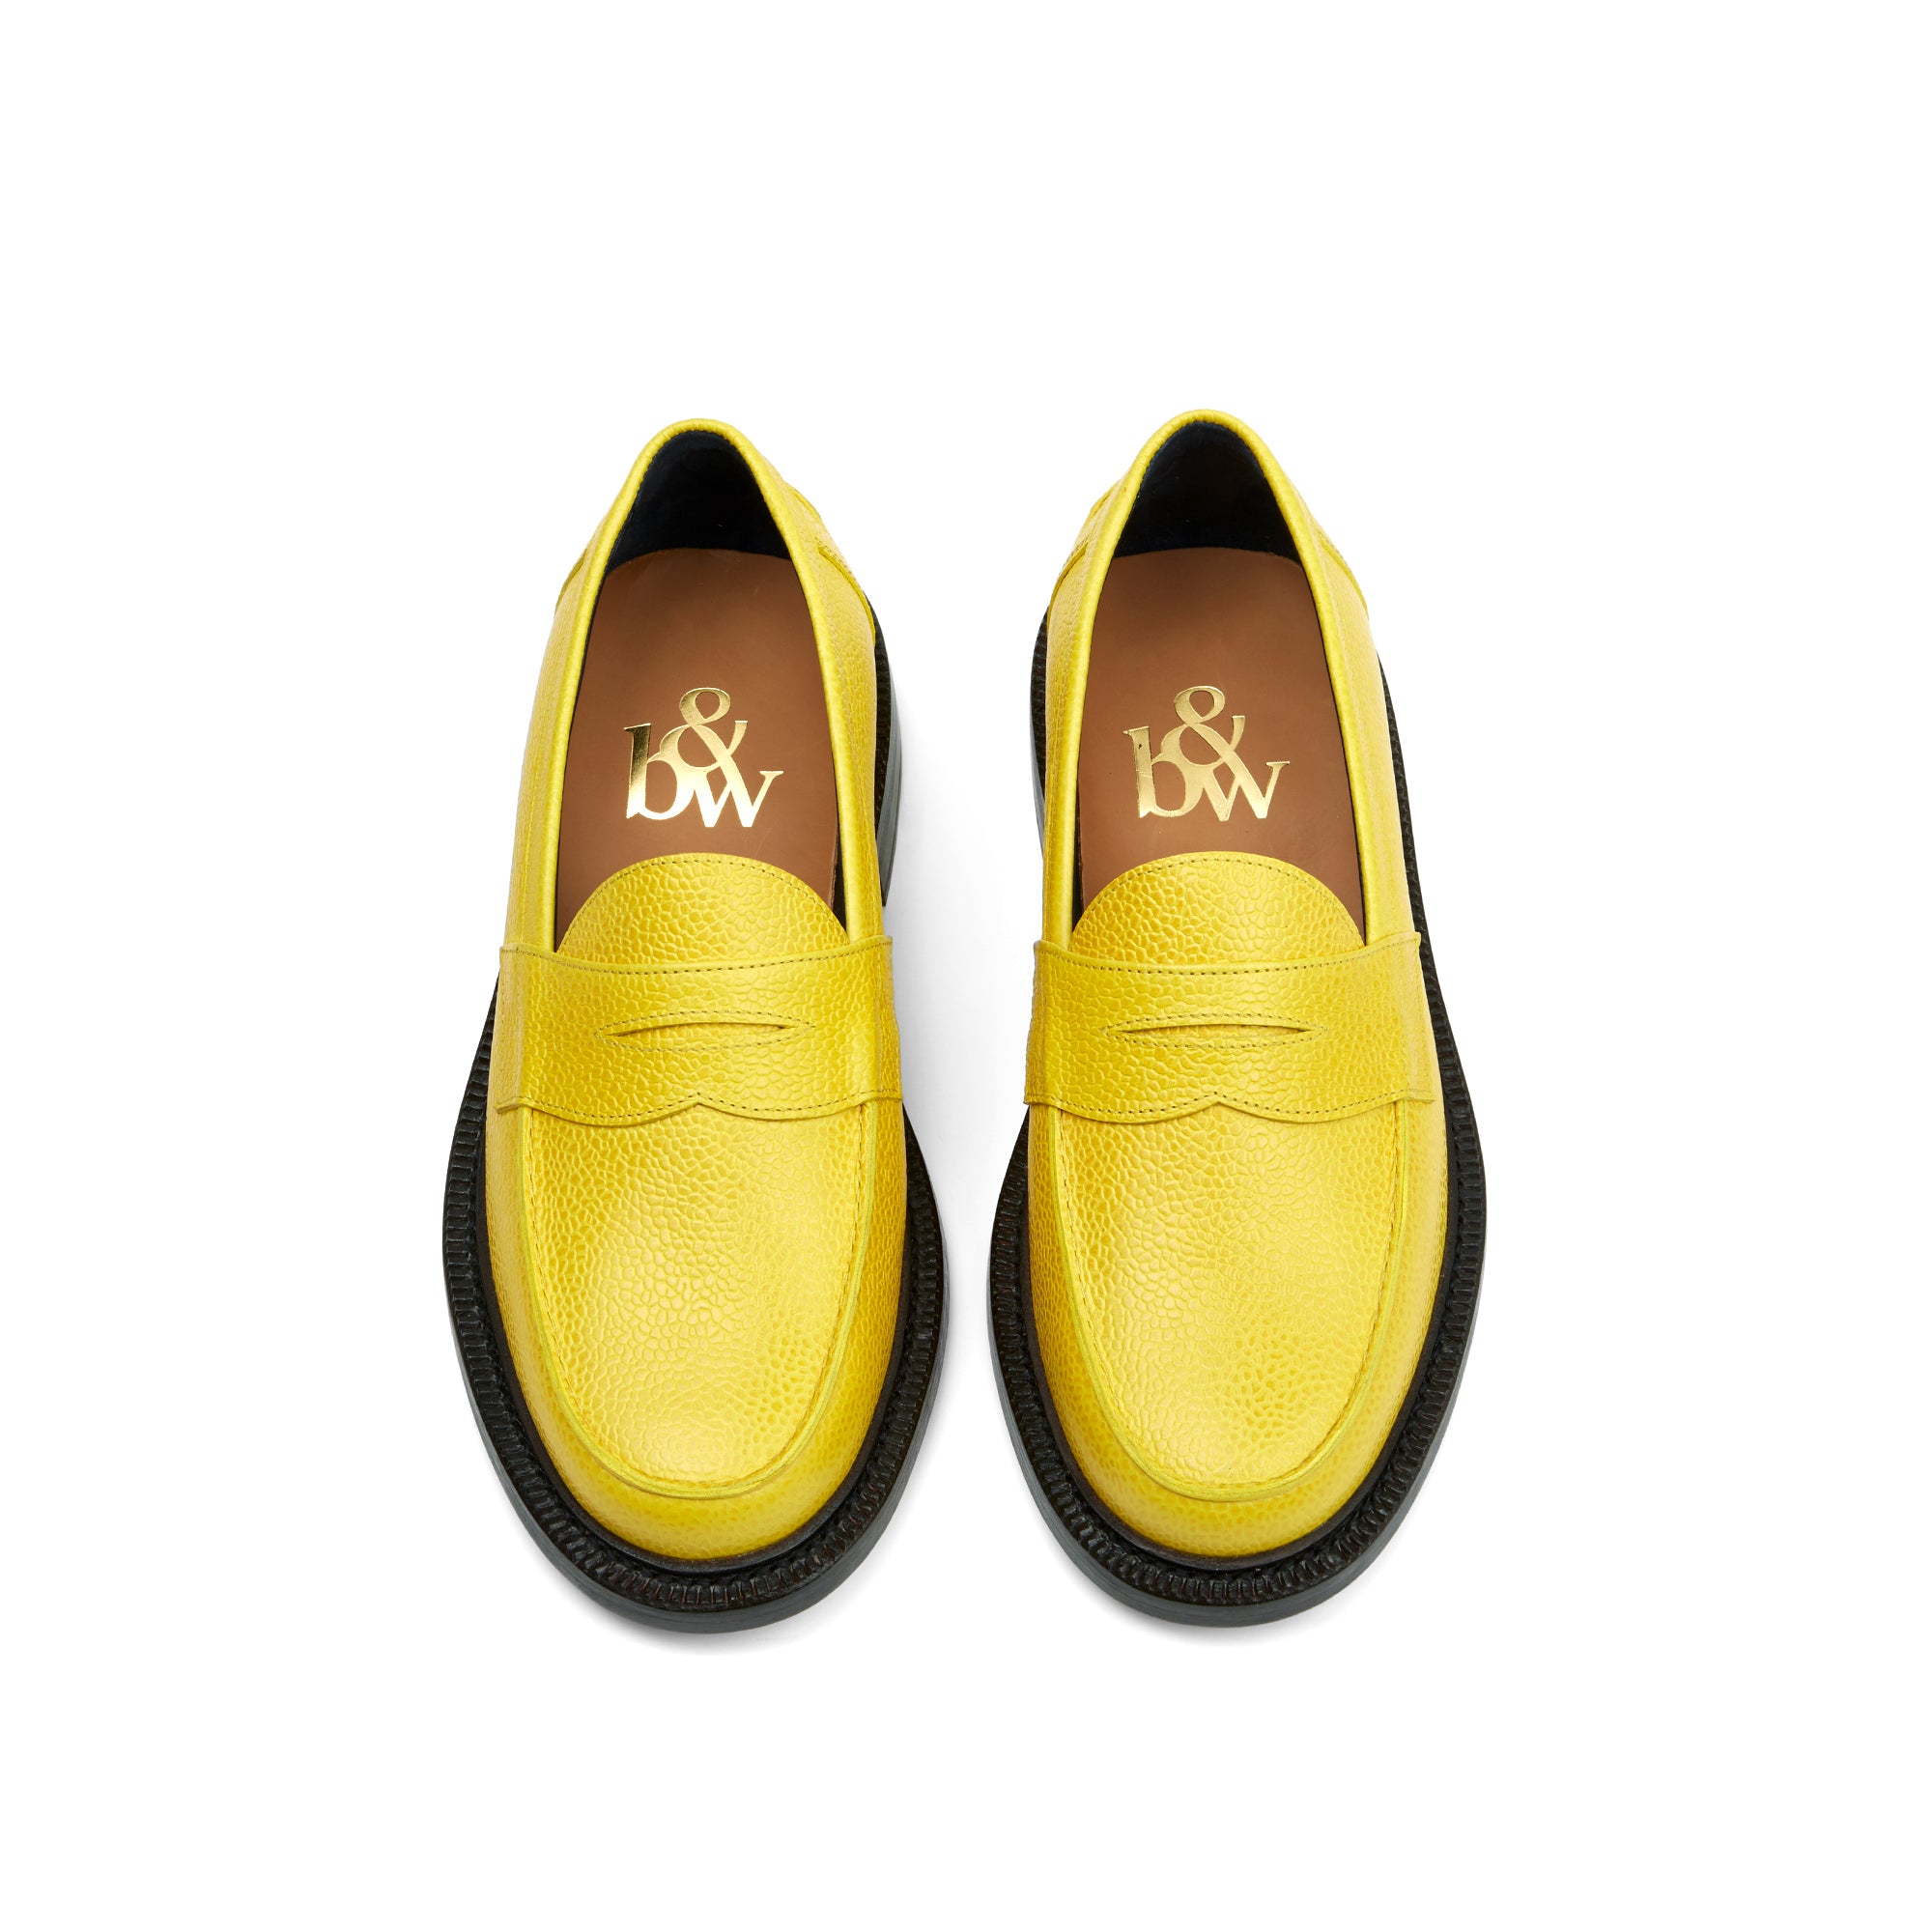 The Ellis Penny Loafer, Canary